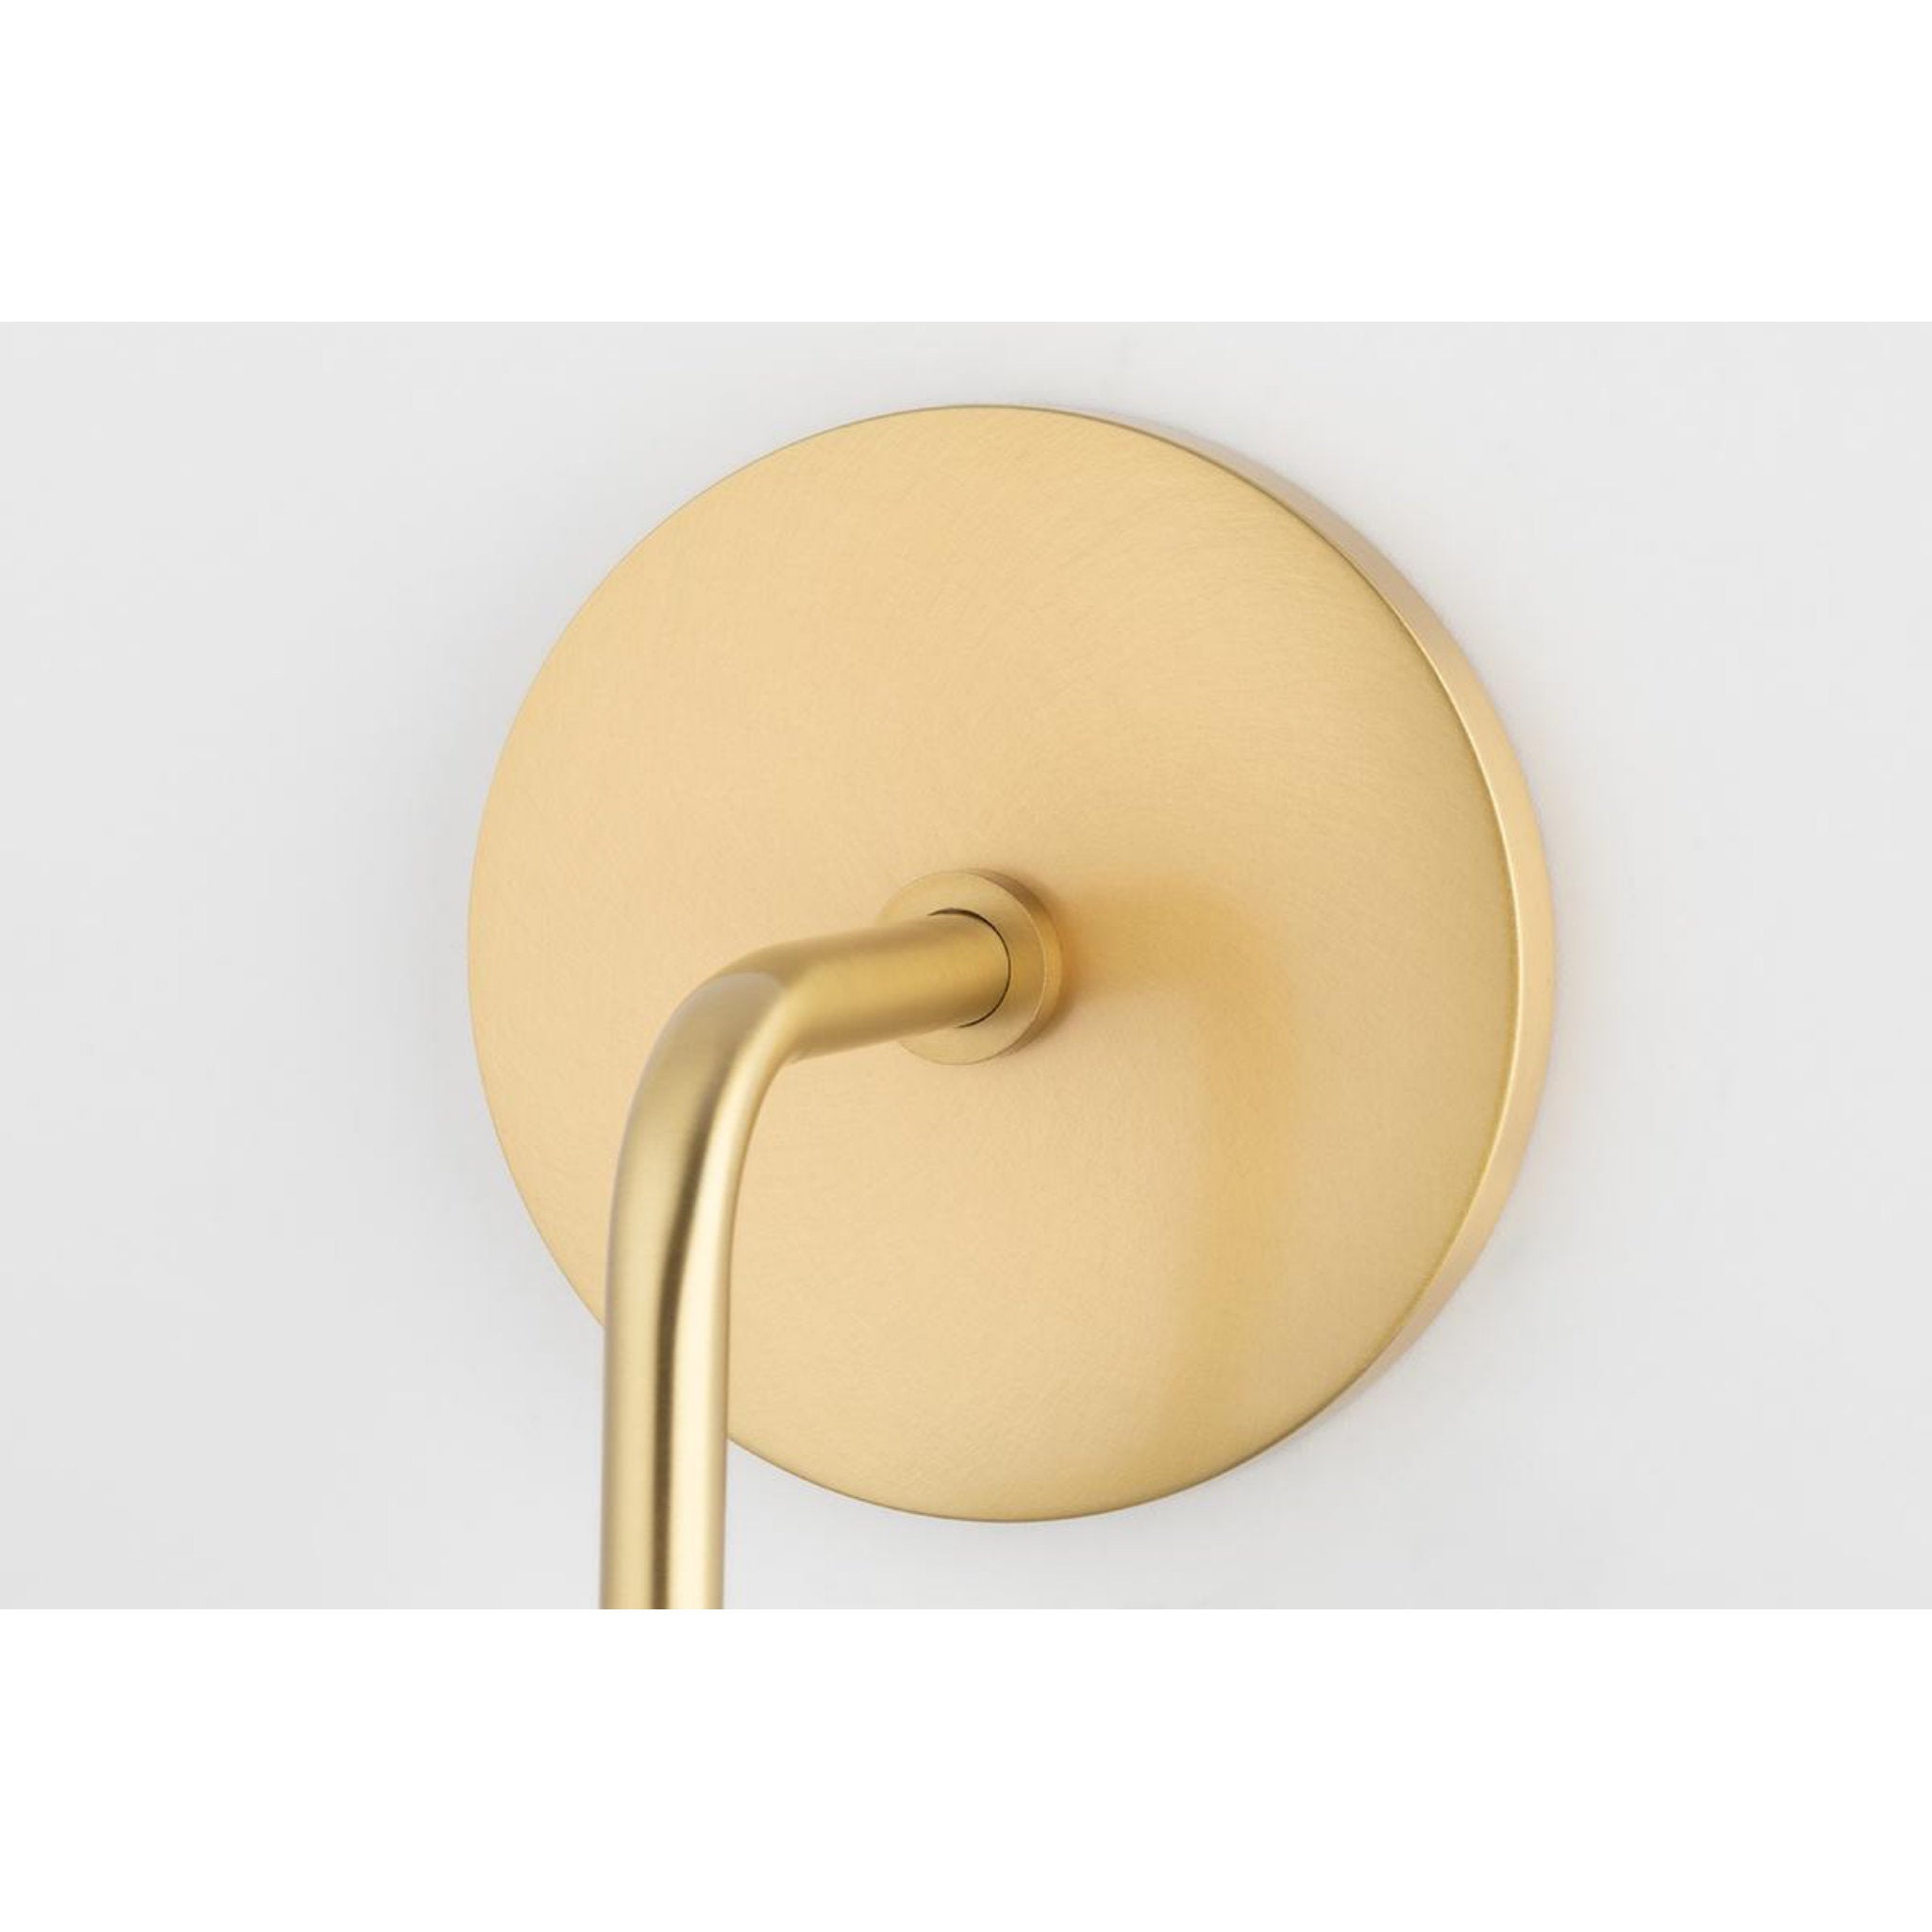 Asime 2-Light Wall Sconce in Aged Brass